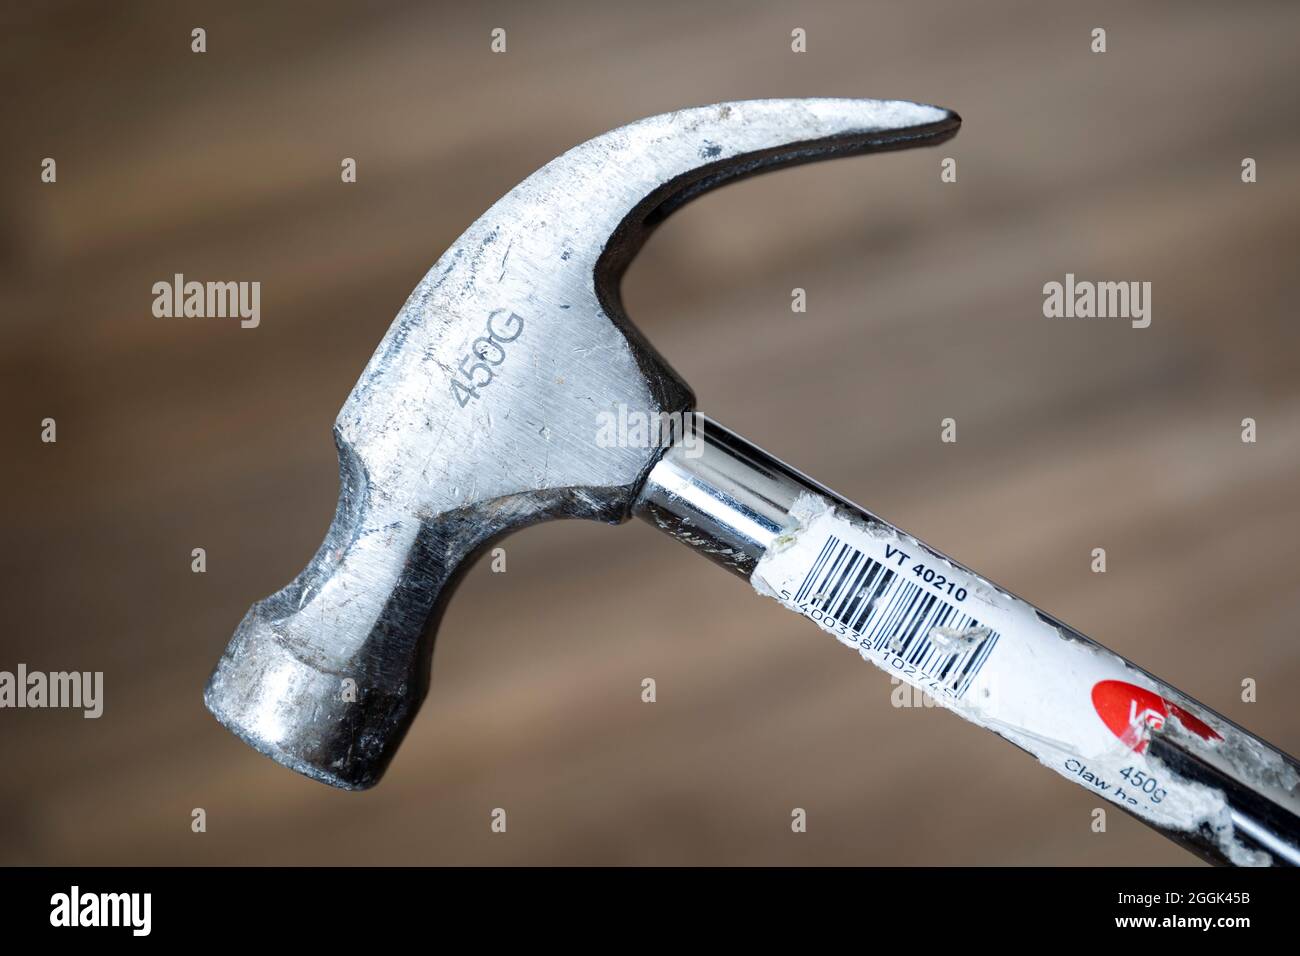 A sideways portrait of a metal claw hamer of 450 grams. The neck, eye, claw, face and head parts of the worn manual construction ool are clearly visib Stock Photo